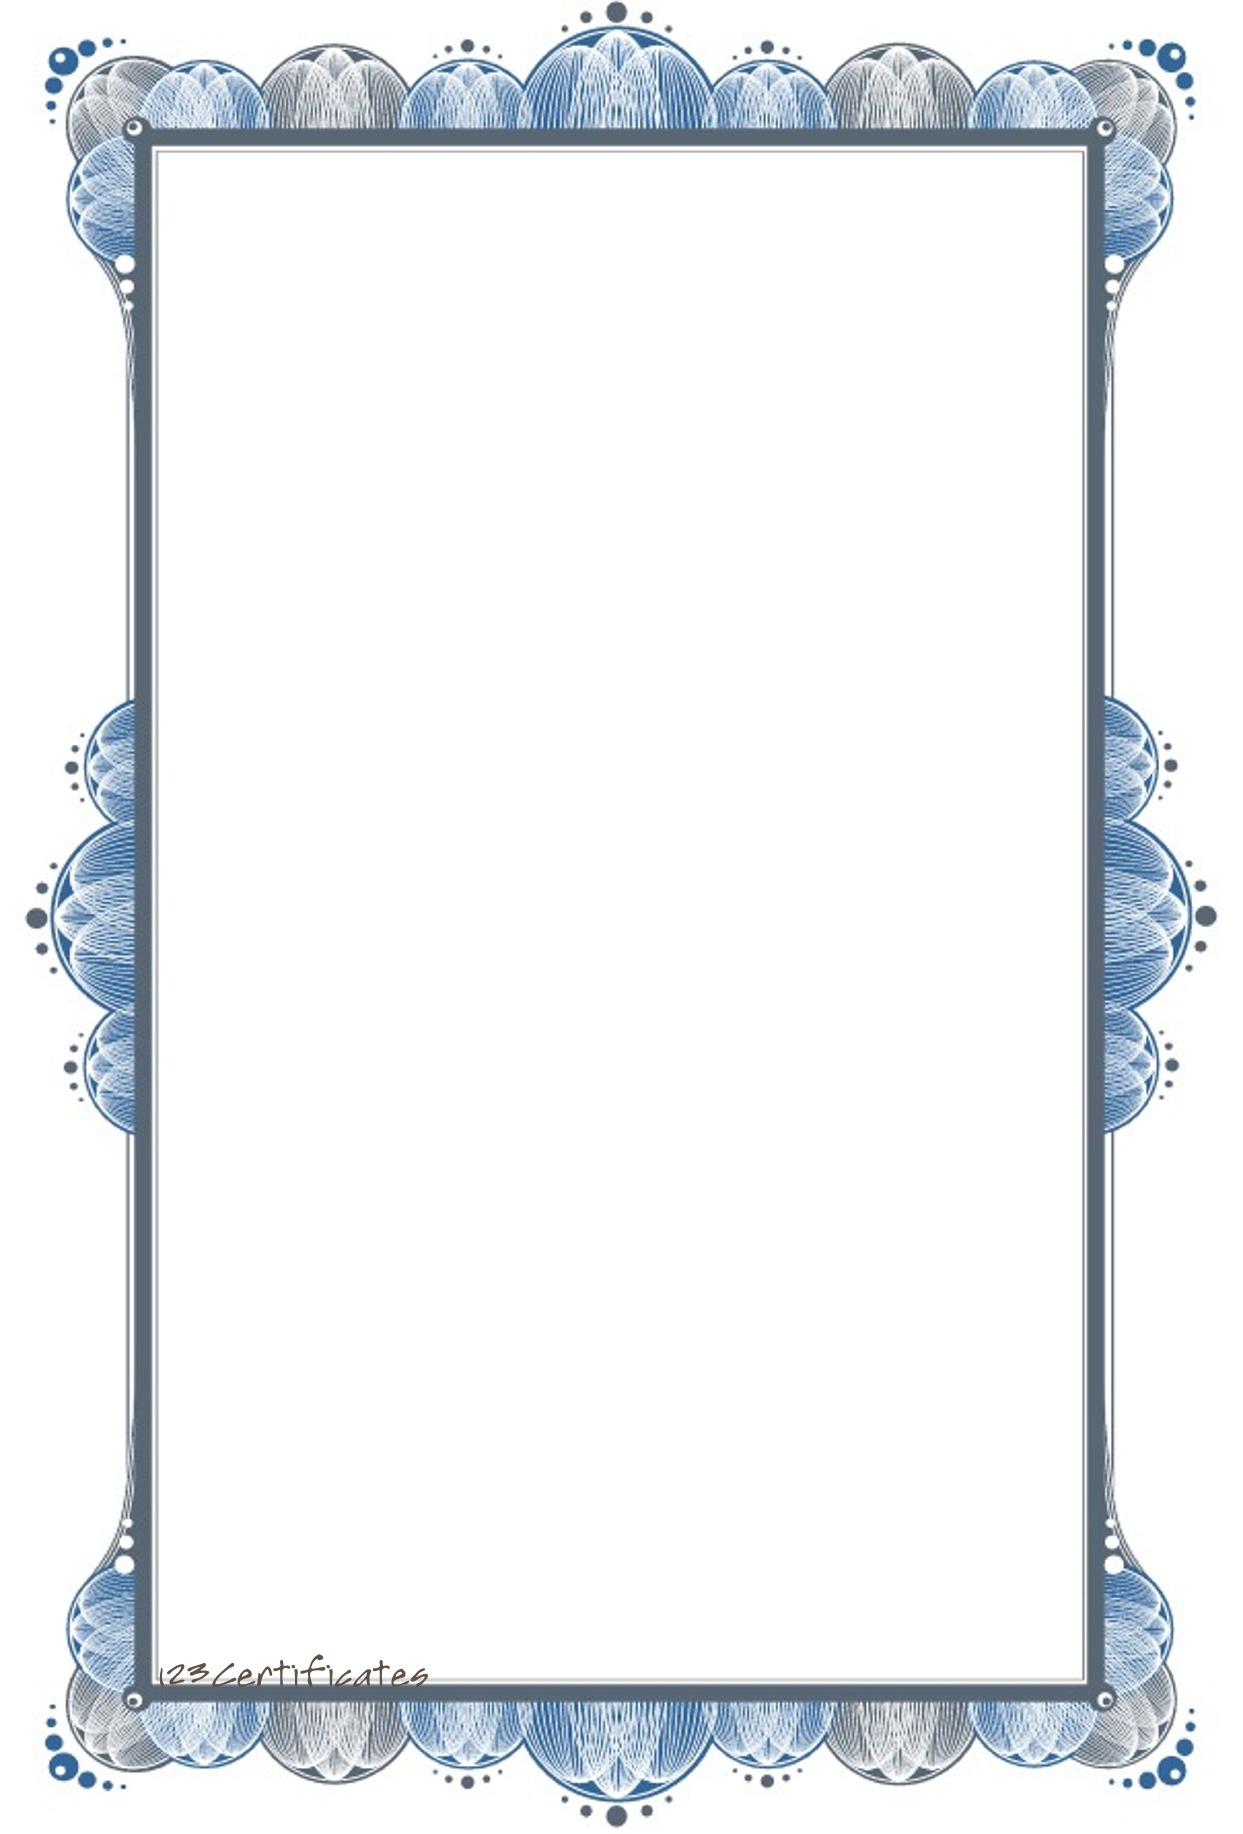 Baby Border Free Template - ClipArt Best